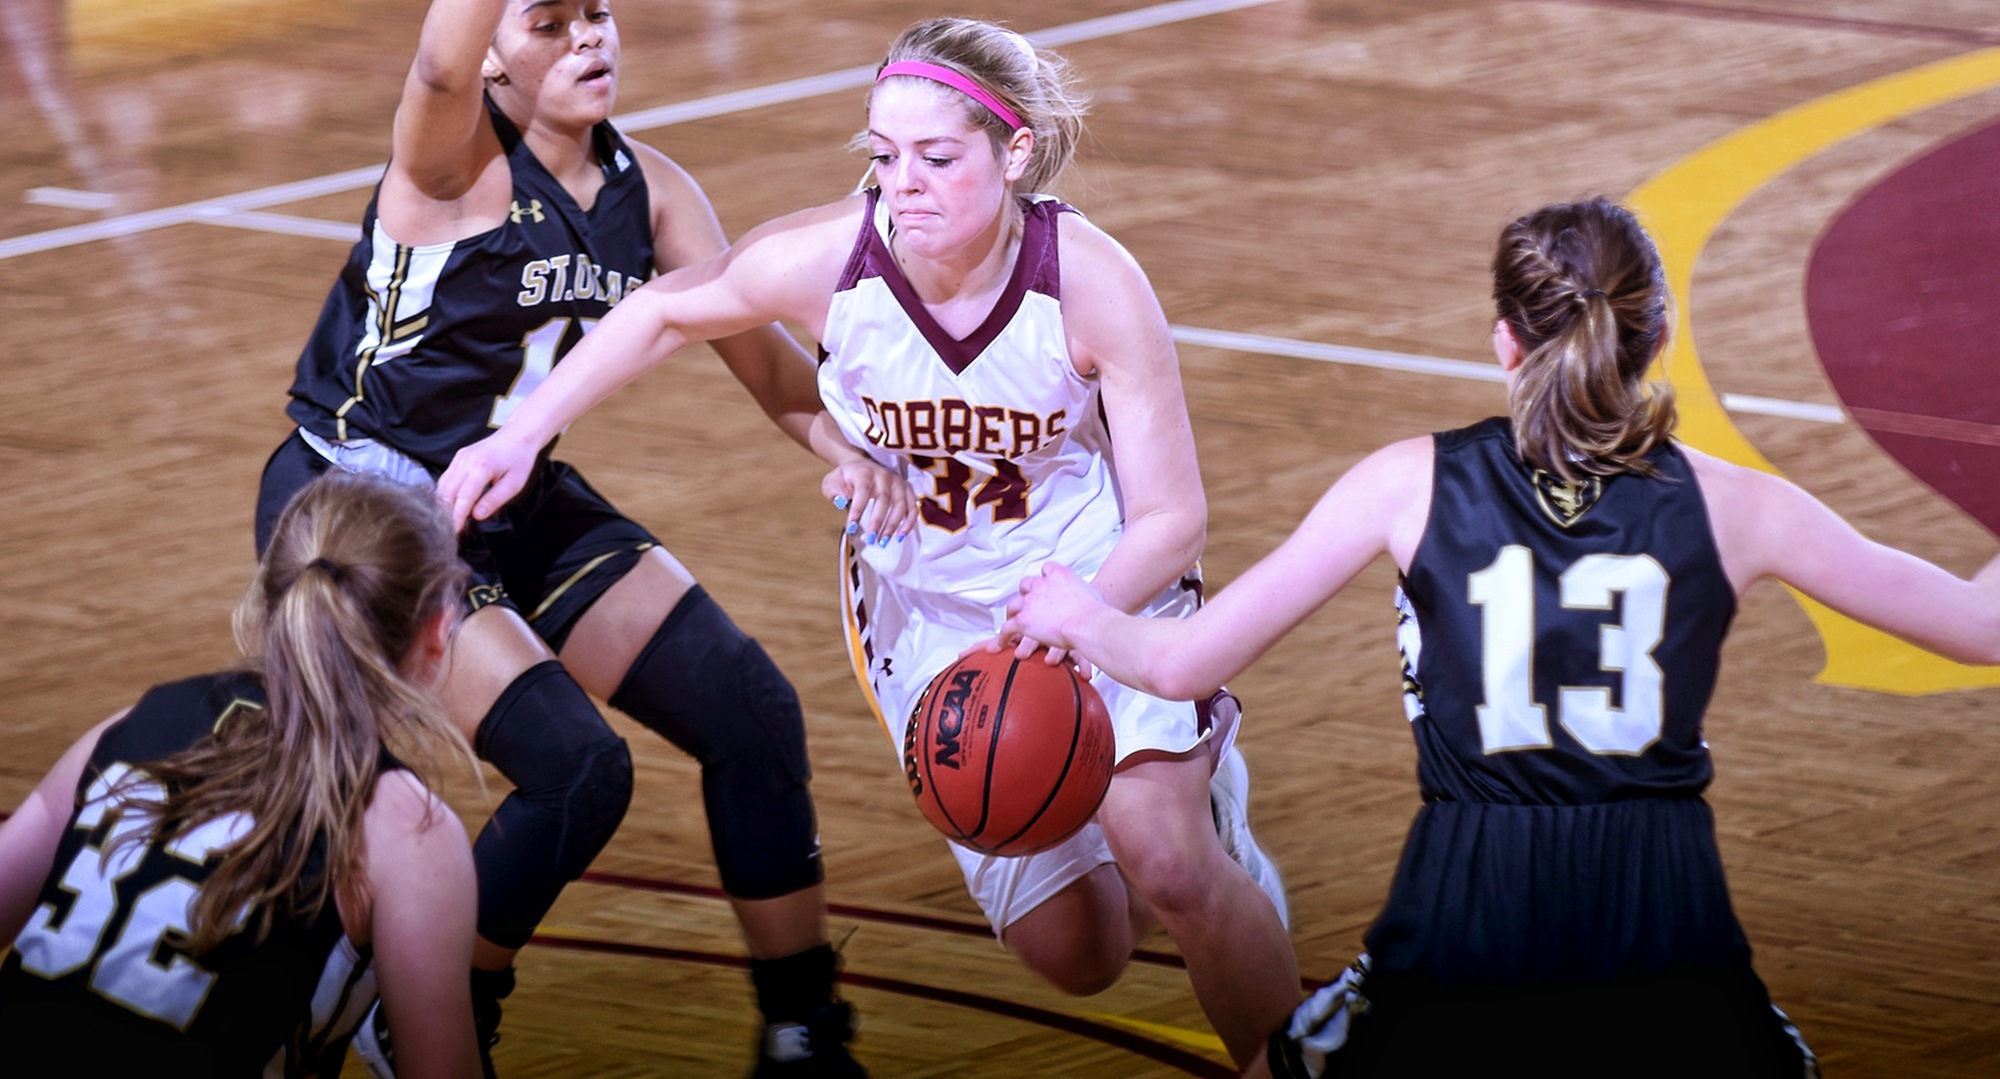 Senior Grace Wolhowe dribbles through traffic on her way to the basket in the second half of the Cobbers' game with St. Olaf. She finished with a team-high 16 points and a career-high six steals.